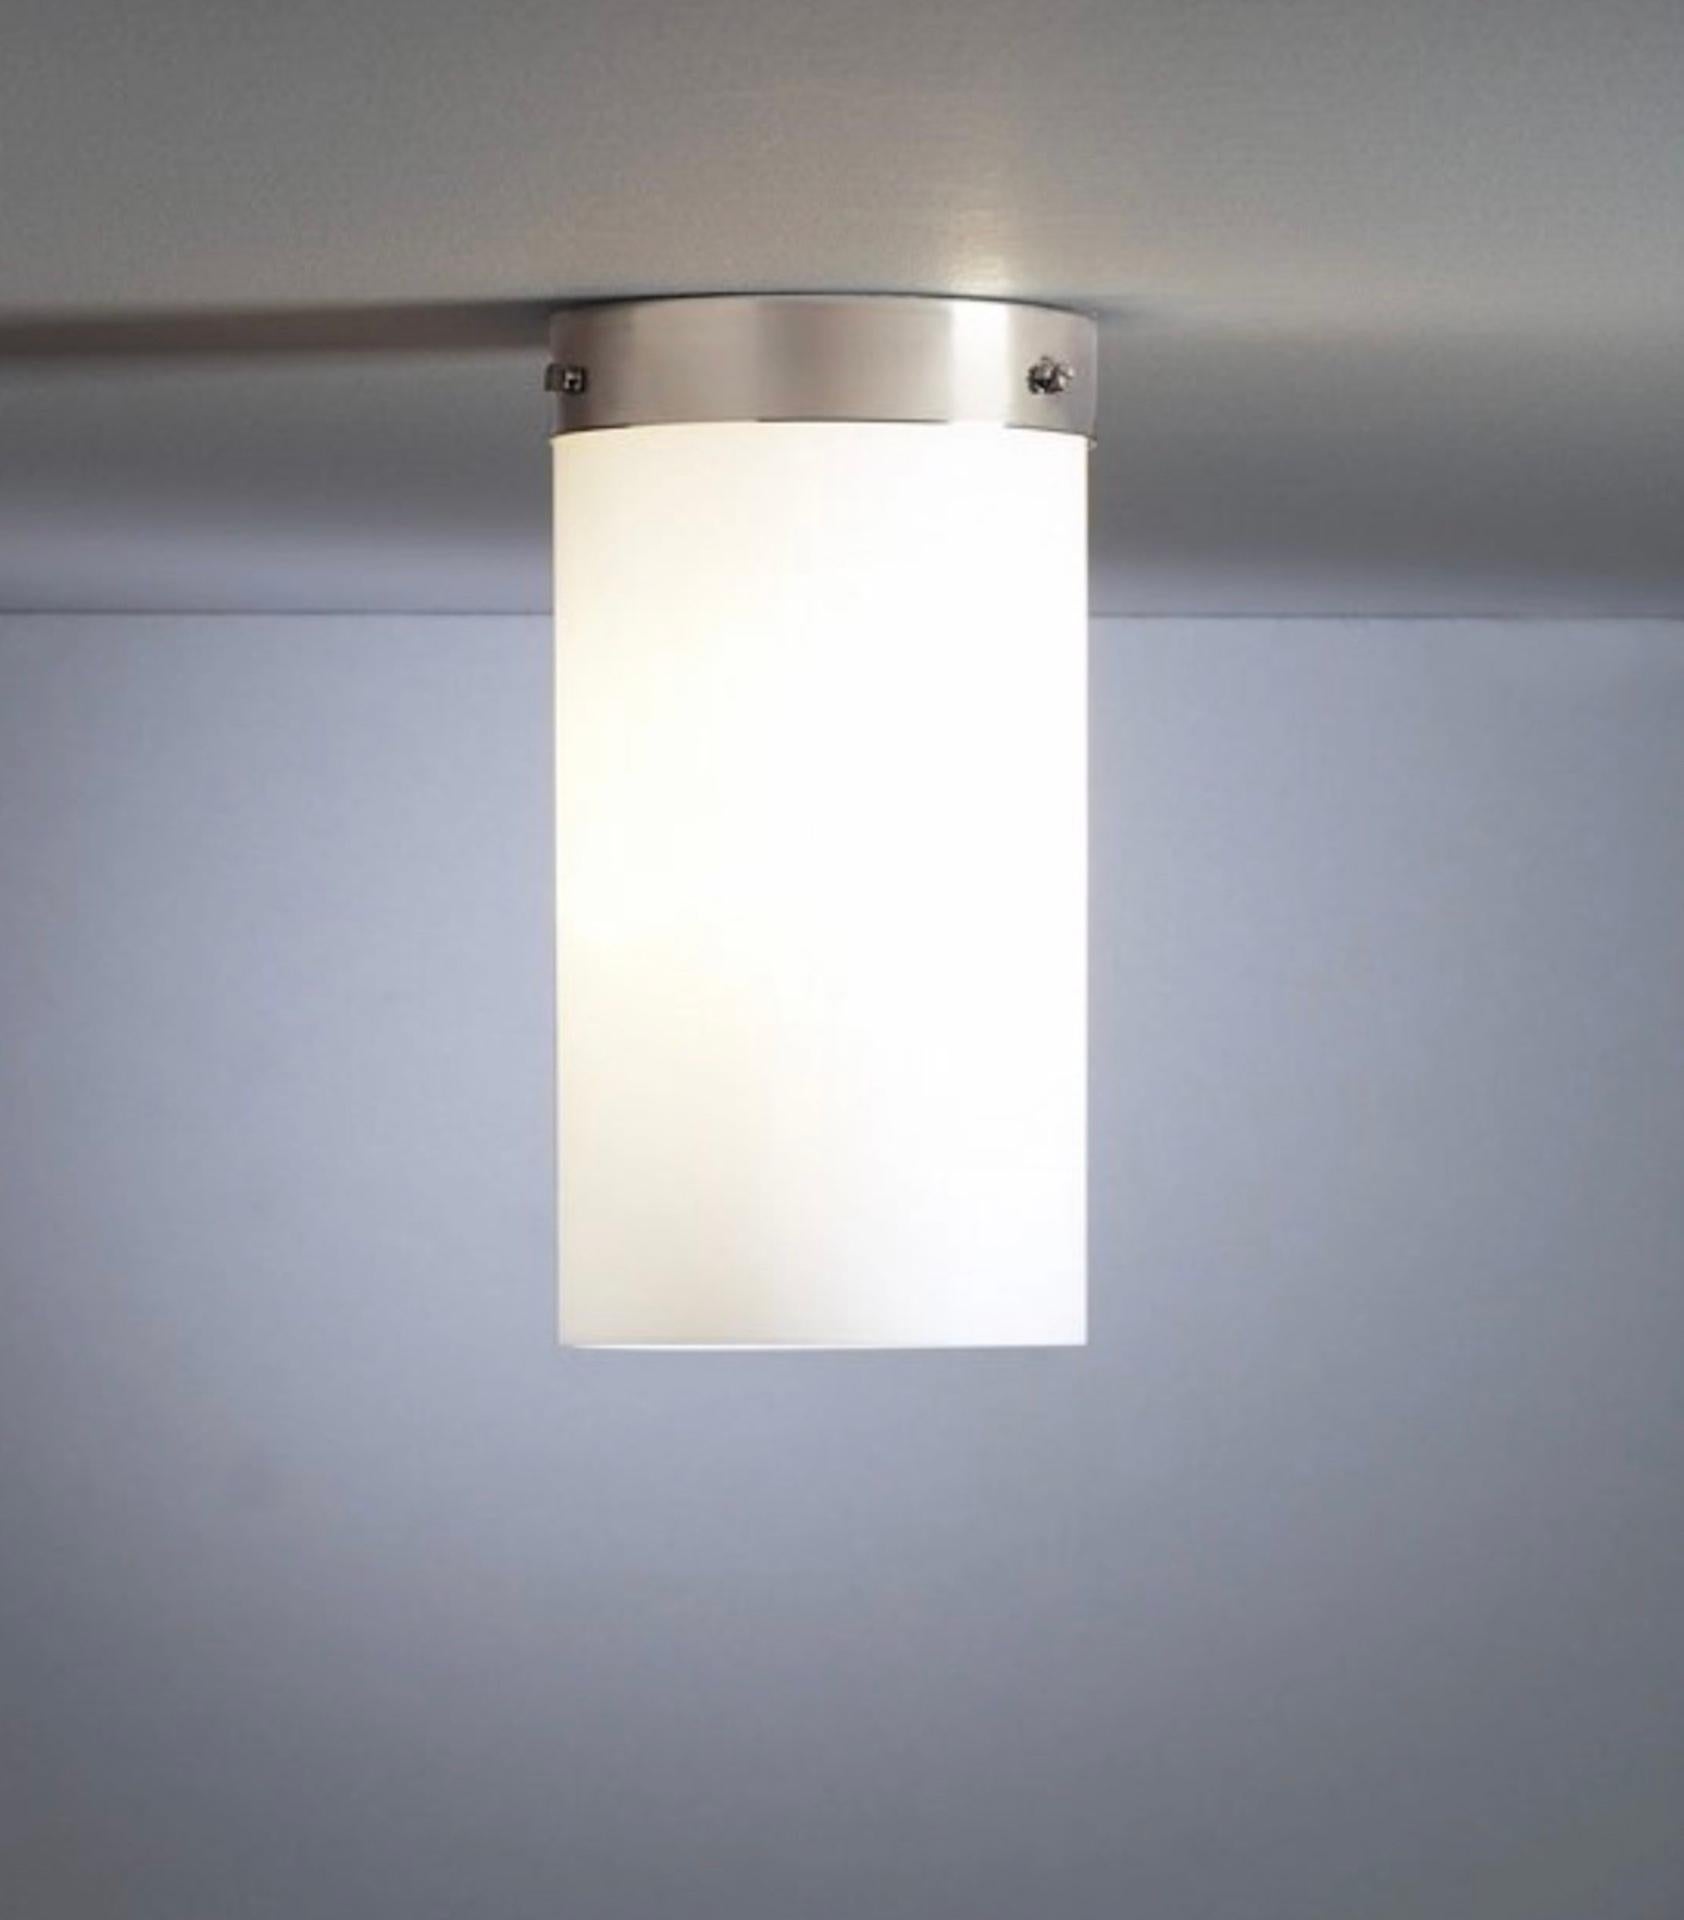 Bauhaus Ceiling Lamp DMB 31 by Marianne Brandt for Tecnolumen In New Condition For Sale In Los Angeles, CA